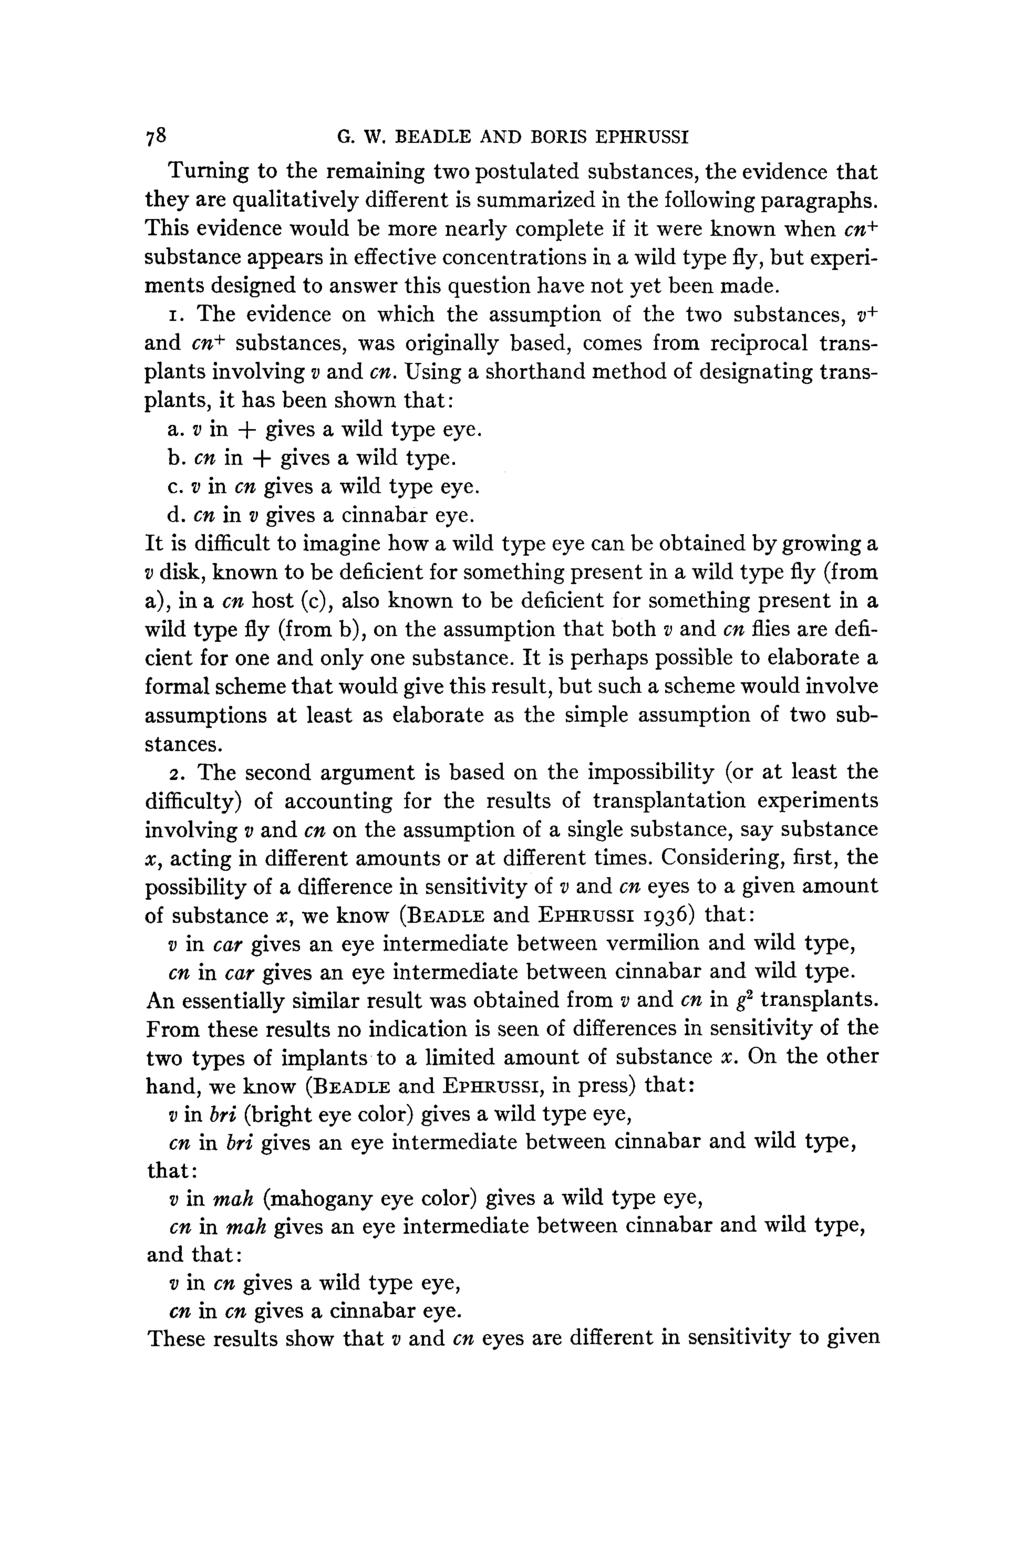 78 G. W. BEADLE AND BORIS EPHRUSSI Turning to the remaining two postulated substances, the evidence that they are qualitatively different is summarized in the following paragraphs.